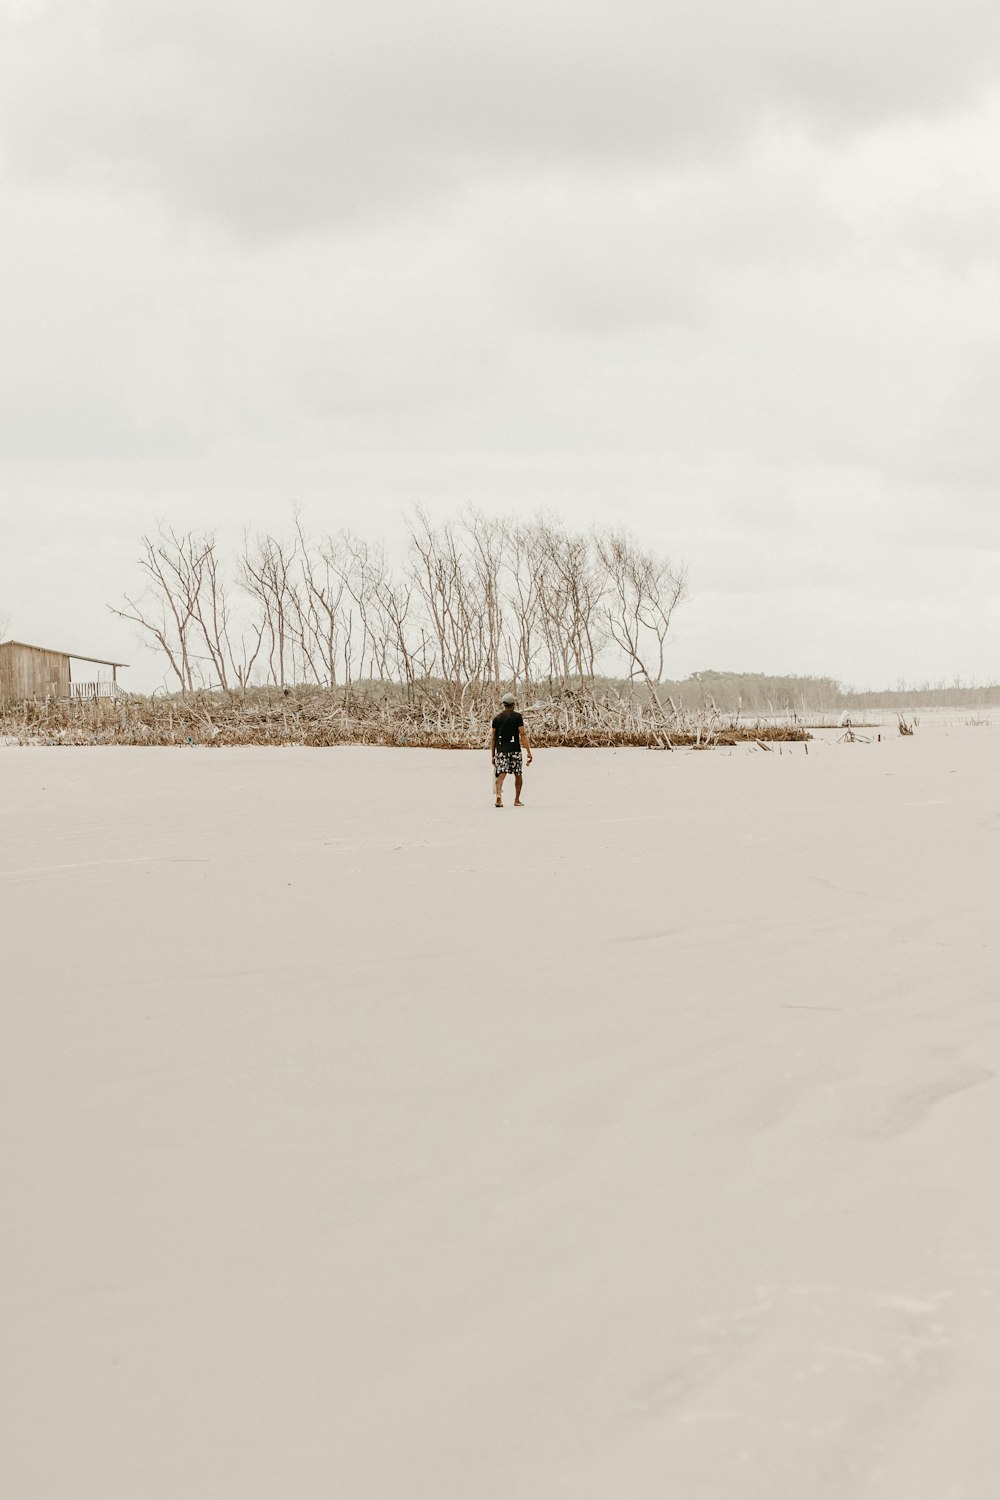 a person standing in the middle of a sandy field